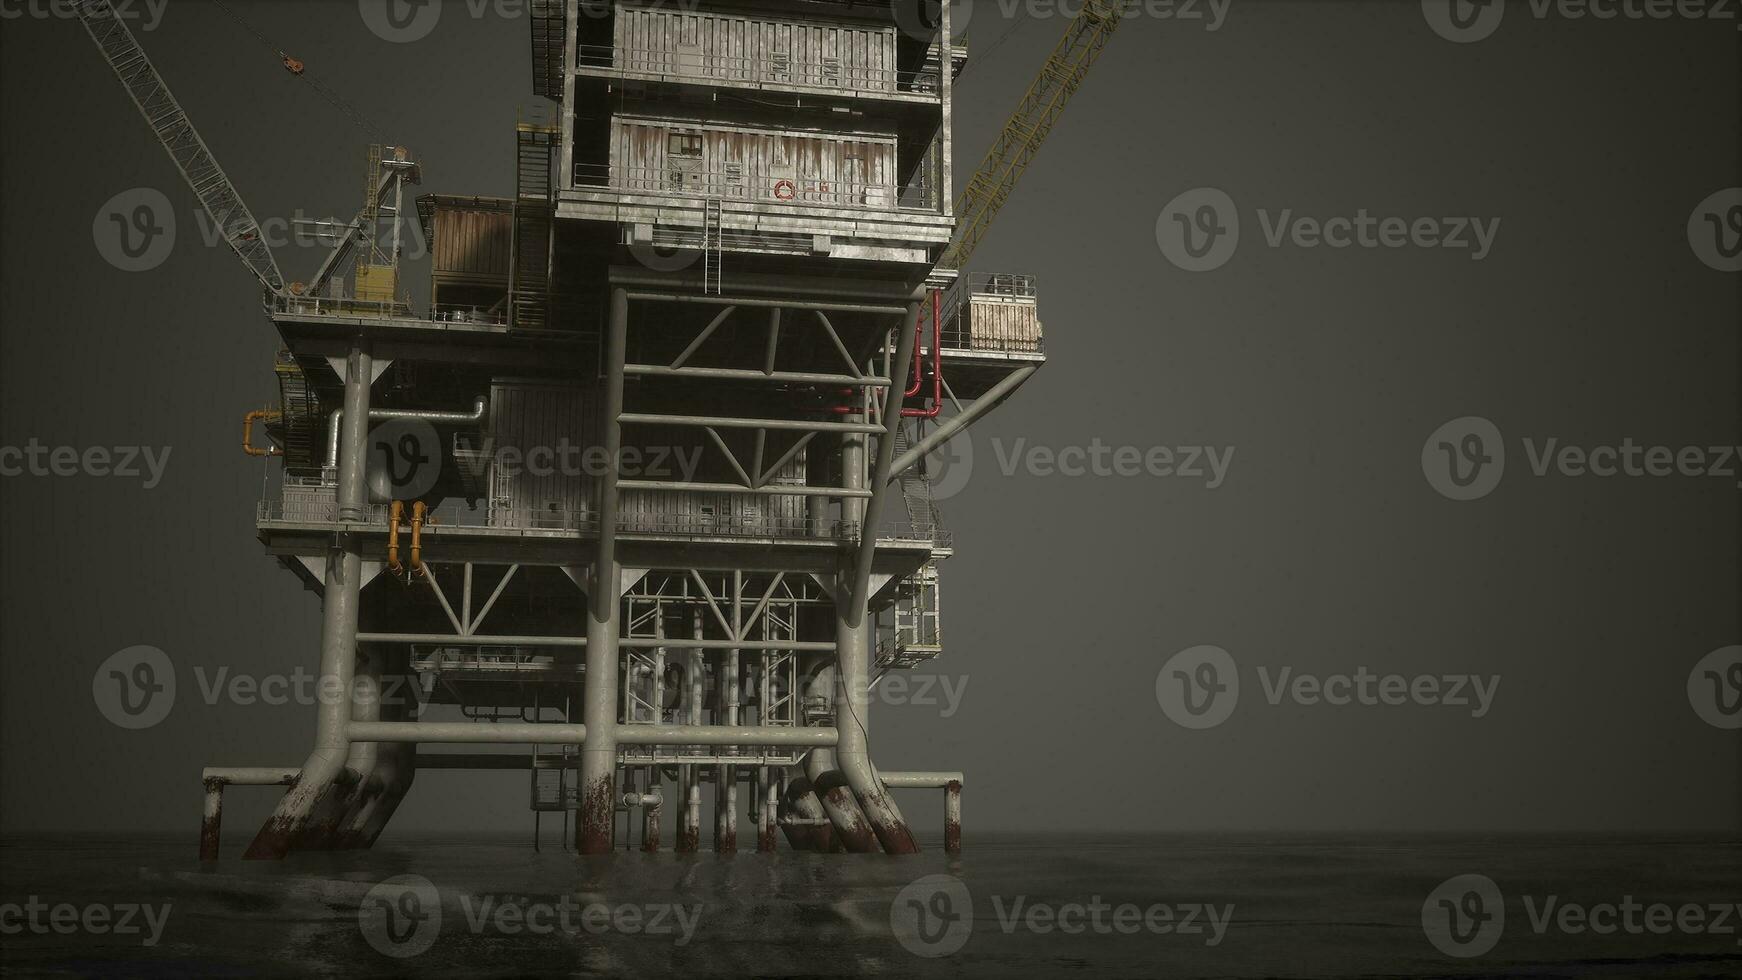 A towering oil rig with a crane perched on top, standing tall in the ocean photo